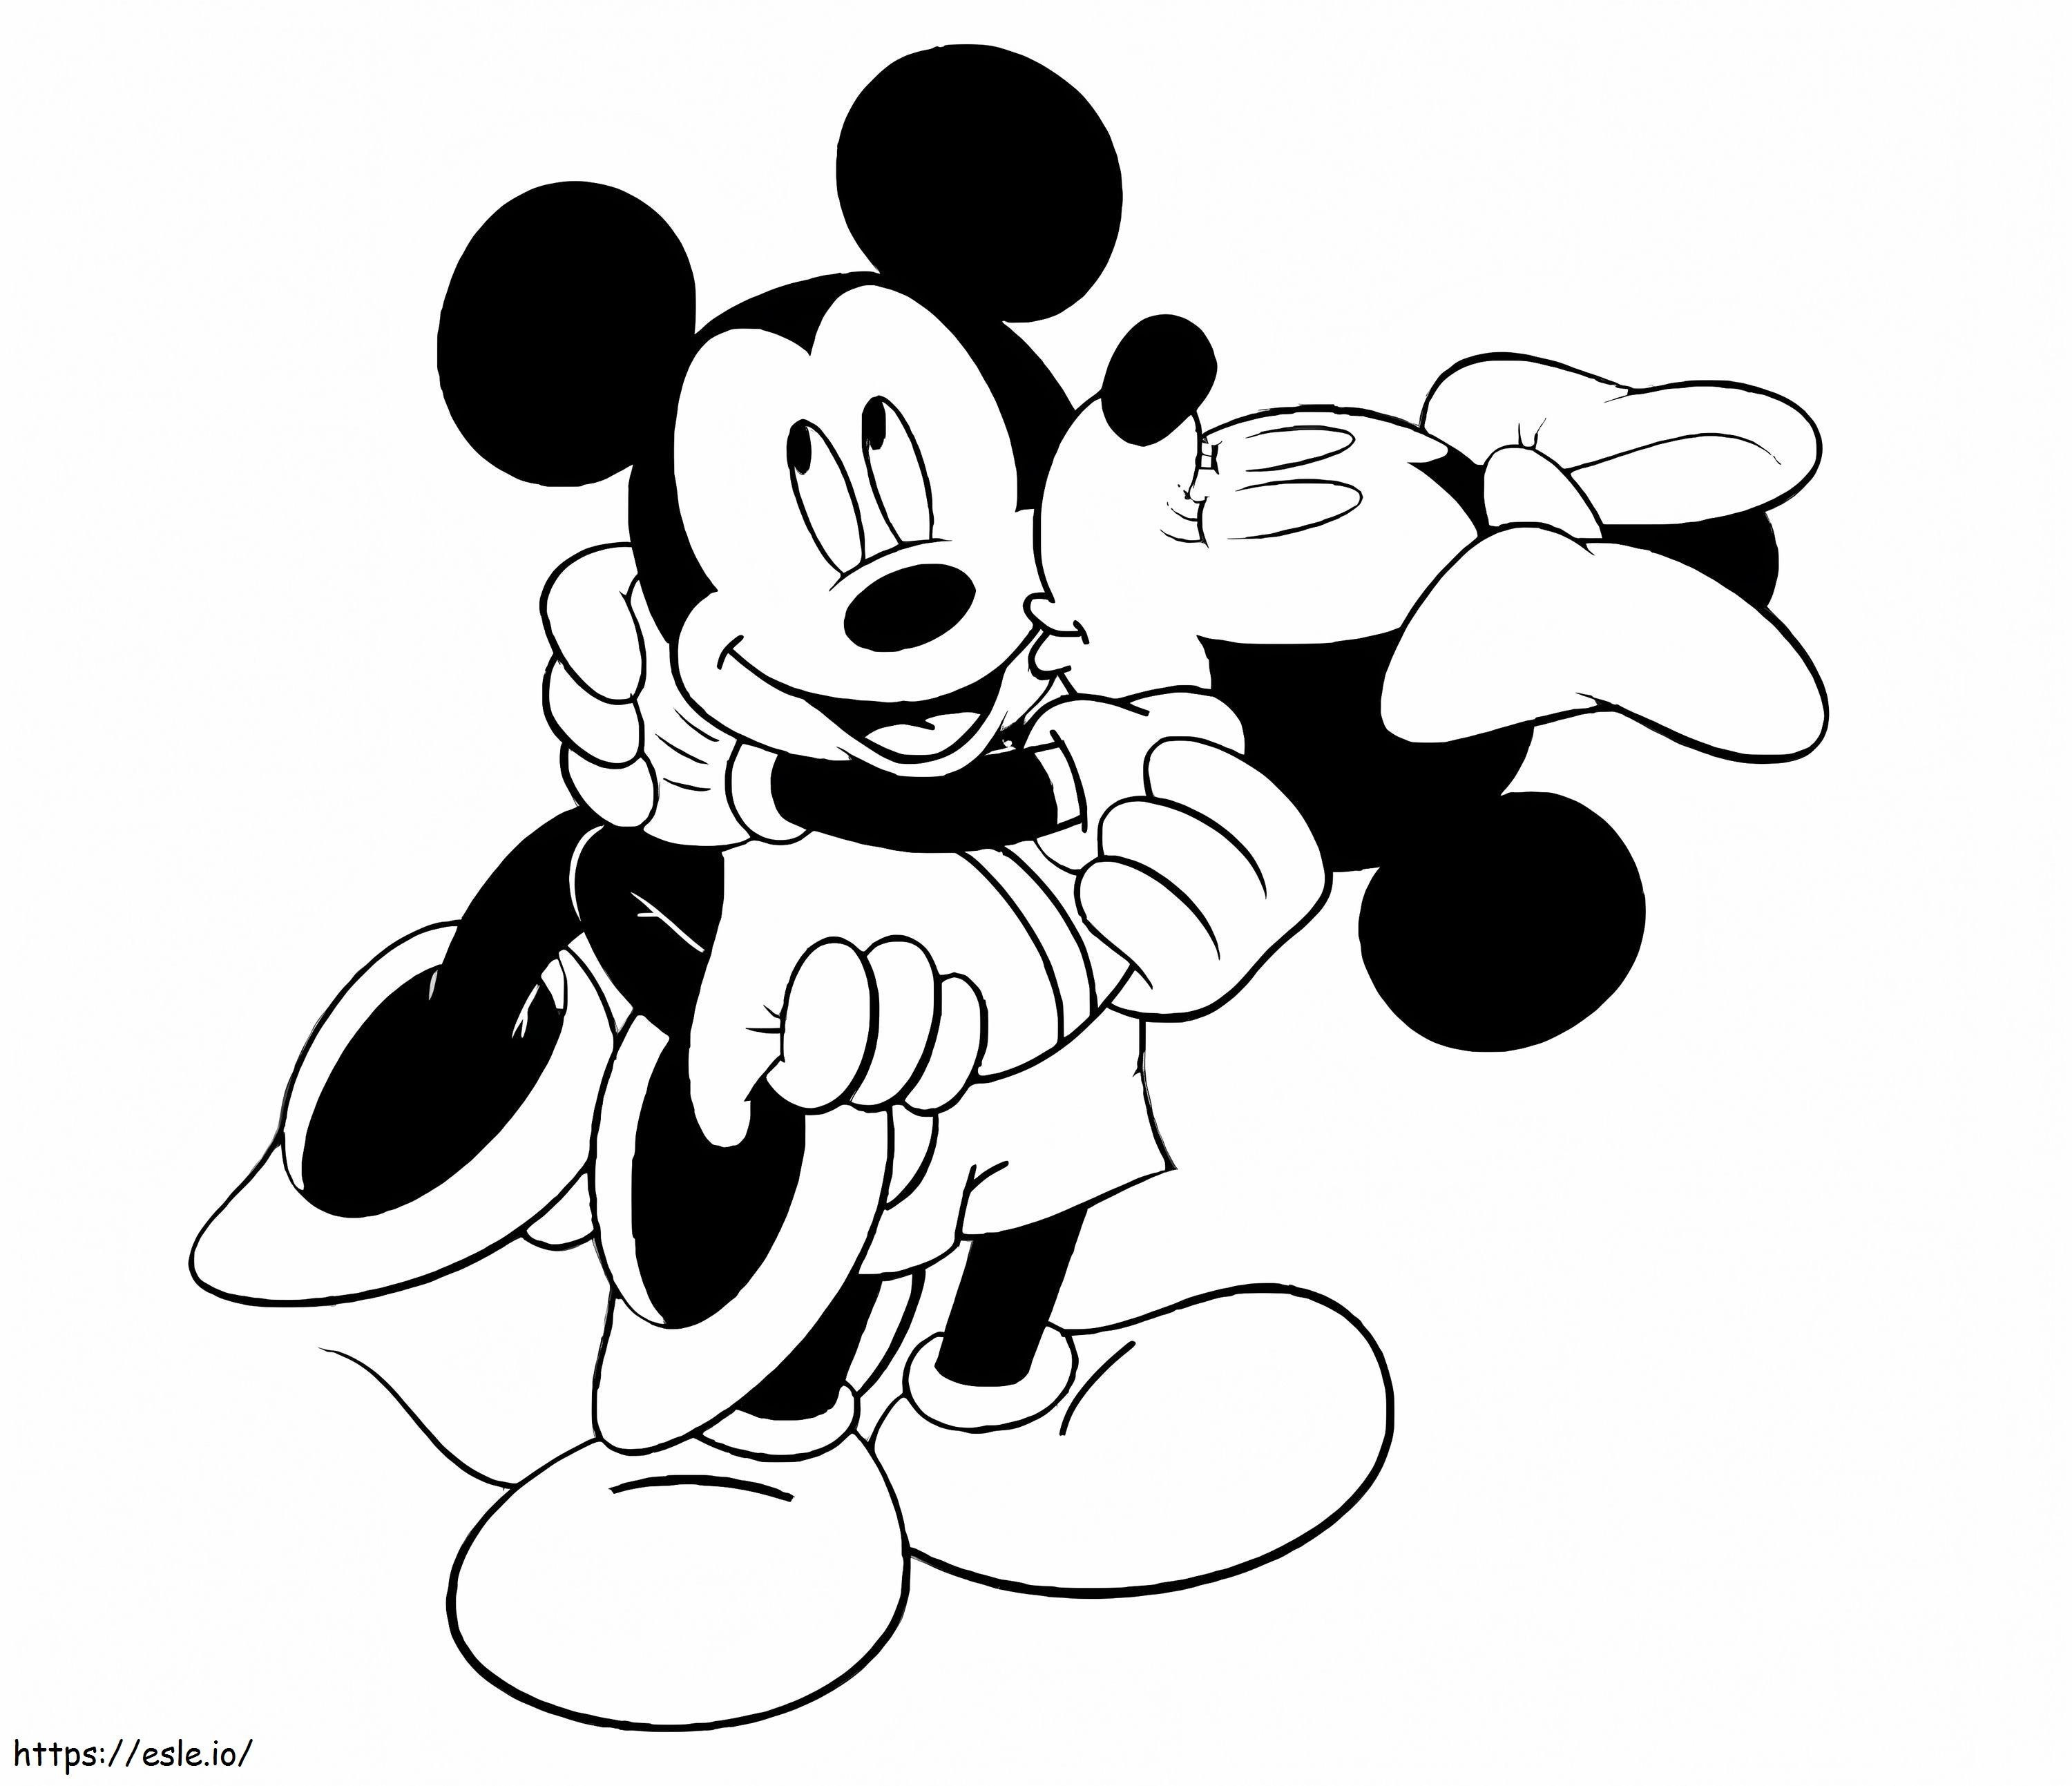 Mickey Mouse Sosteniendo A Minnie Mouse coloring page